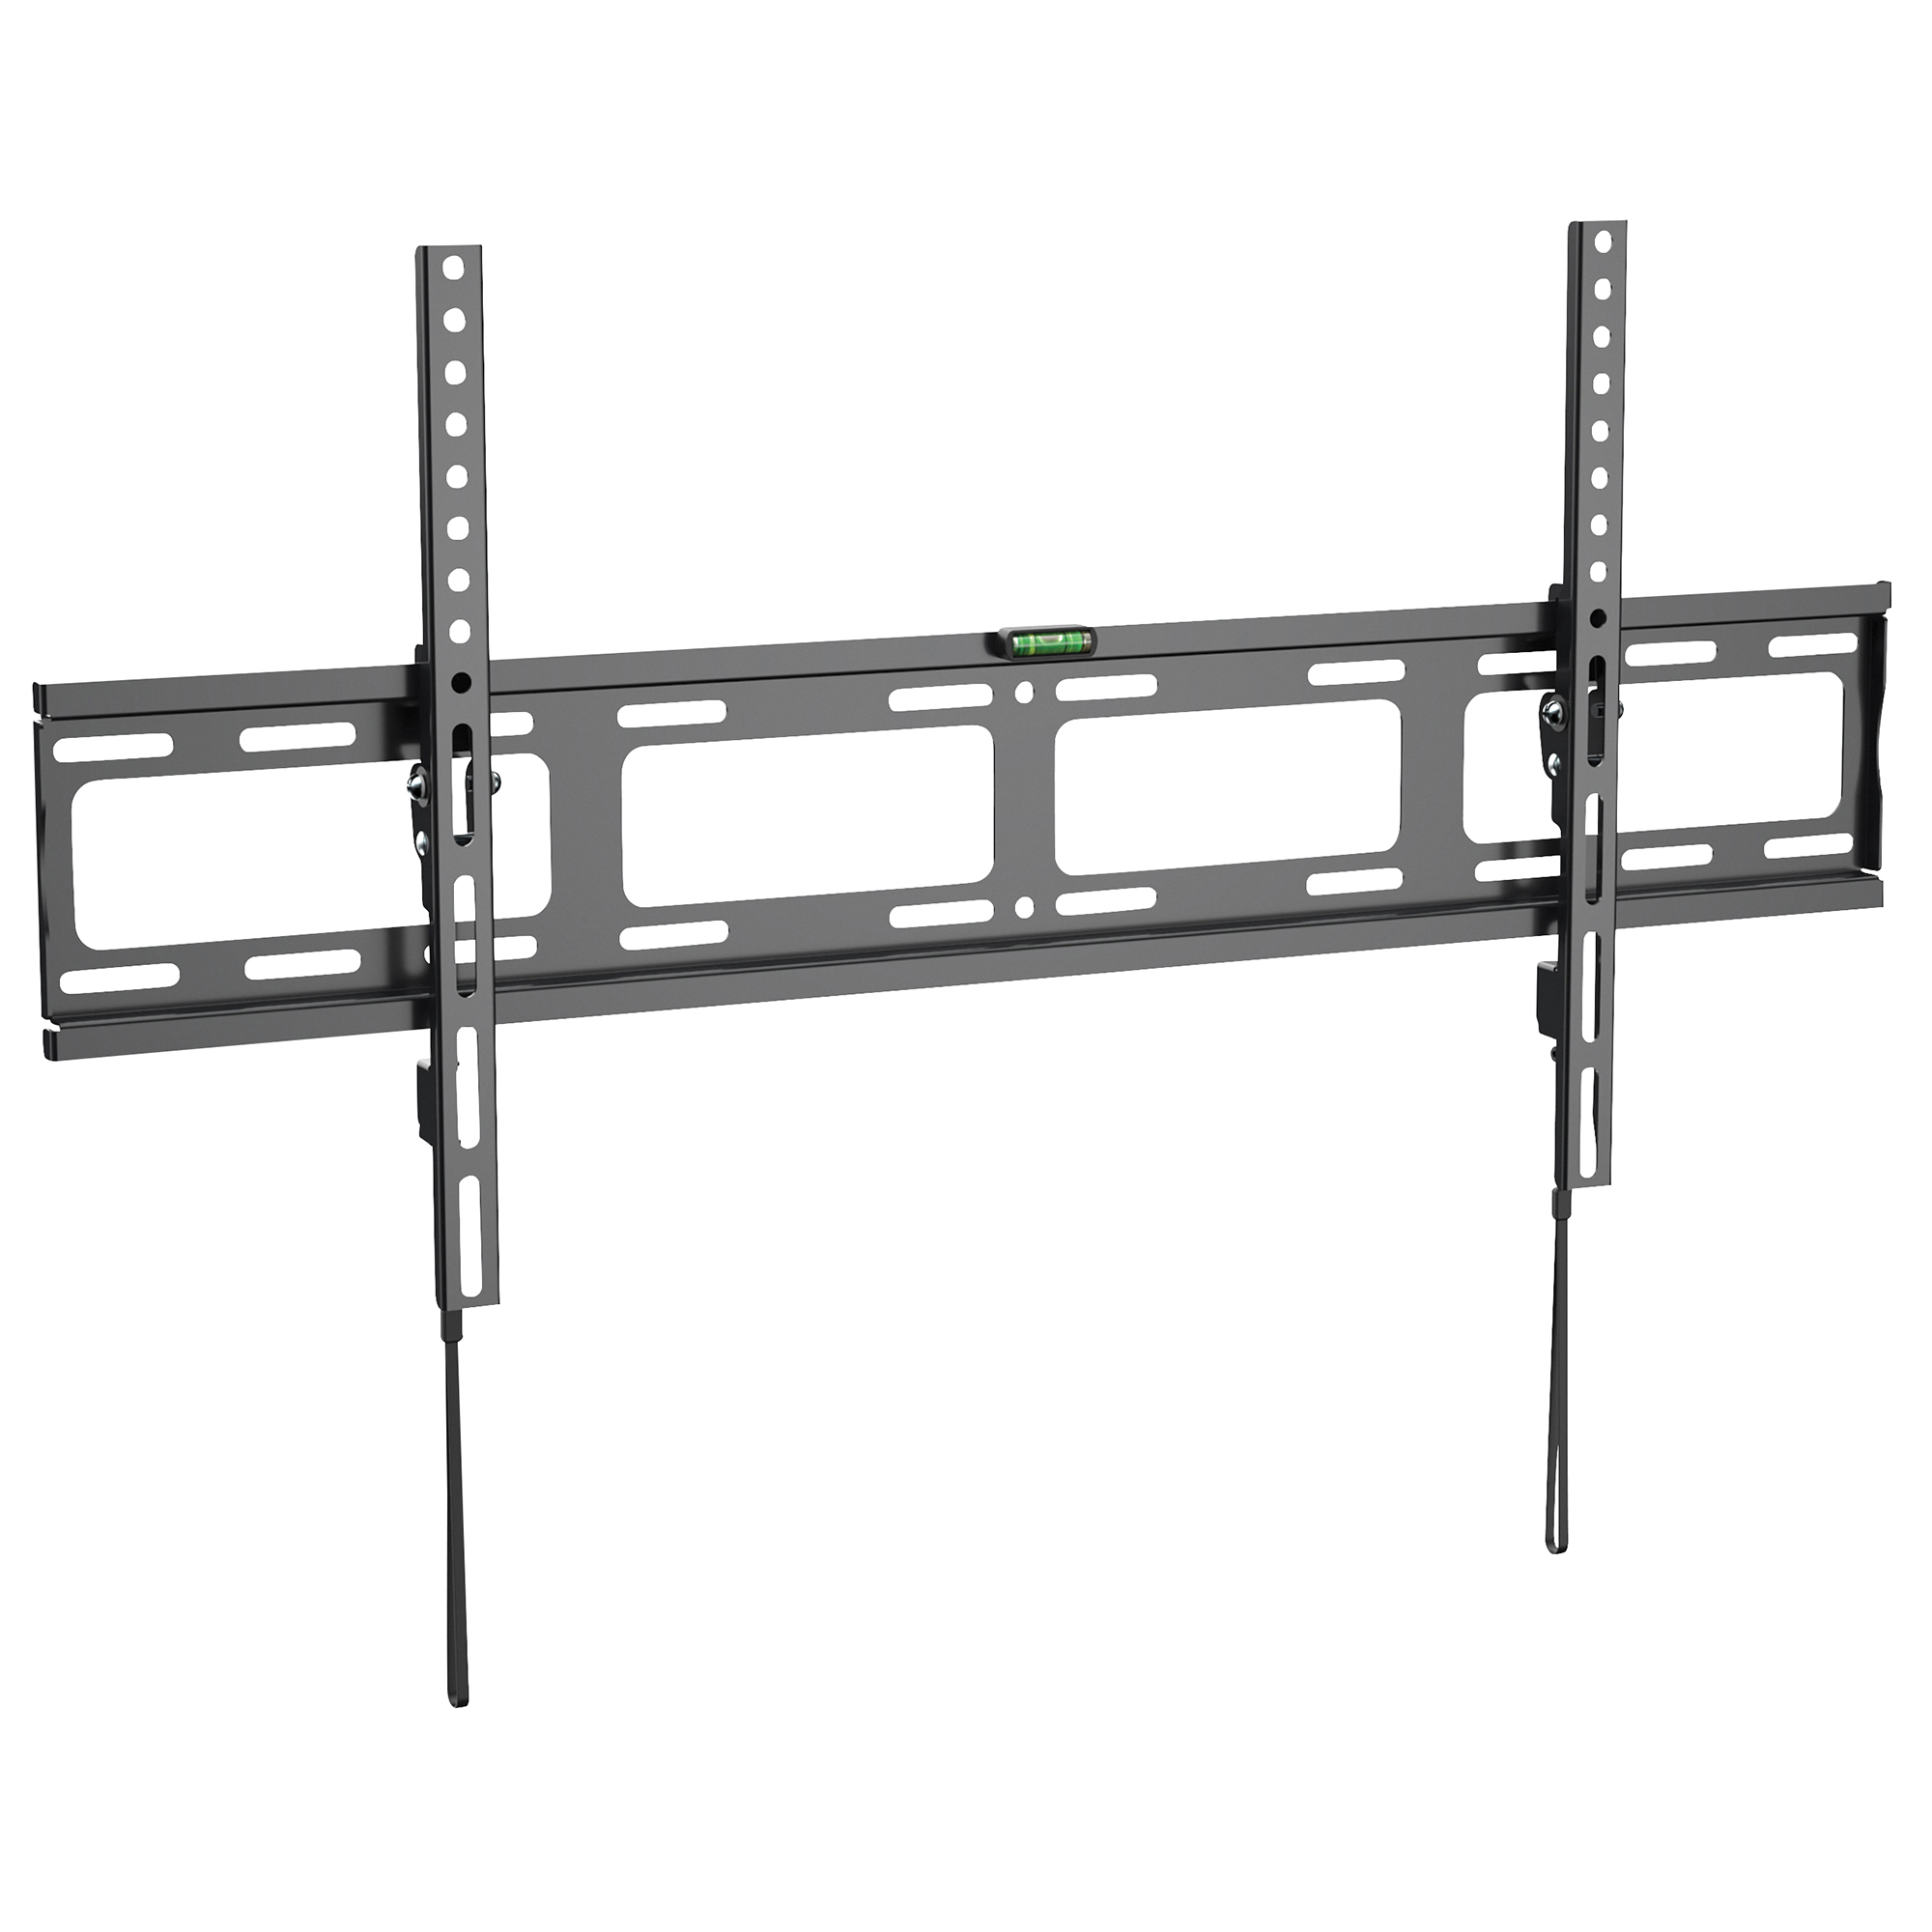 Peerless, 65Inch to 90Inch Universal Flat/Tilt Wall Mount, Capacity 132 lb, Material Steel, Color Finish Black, Model T8X4